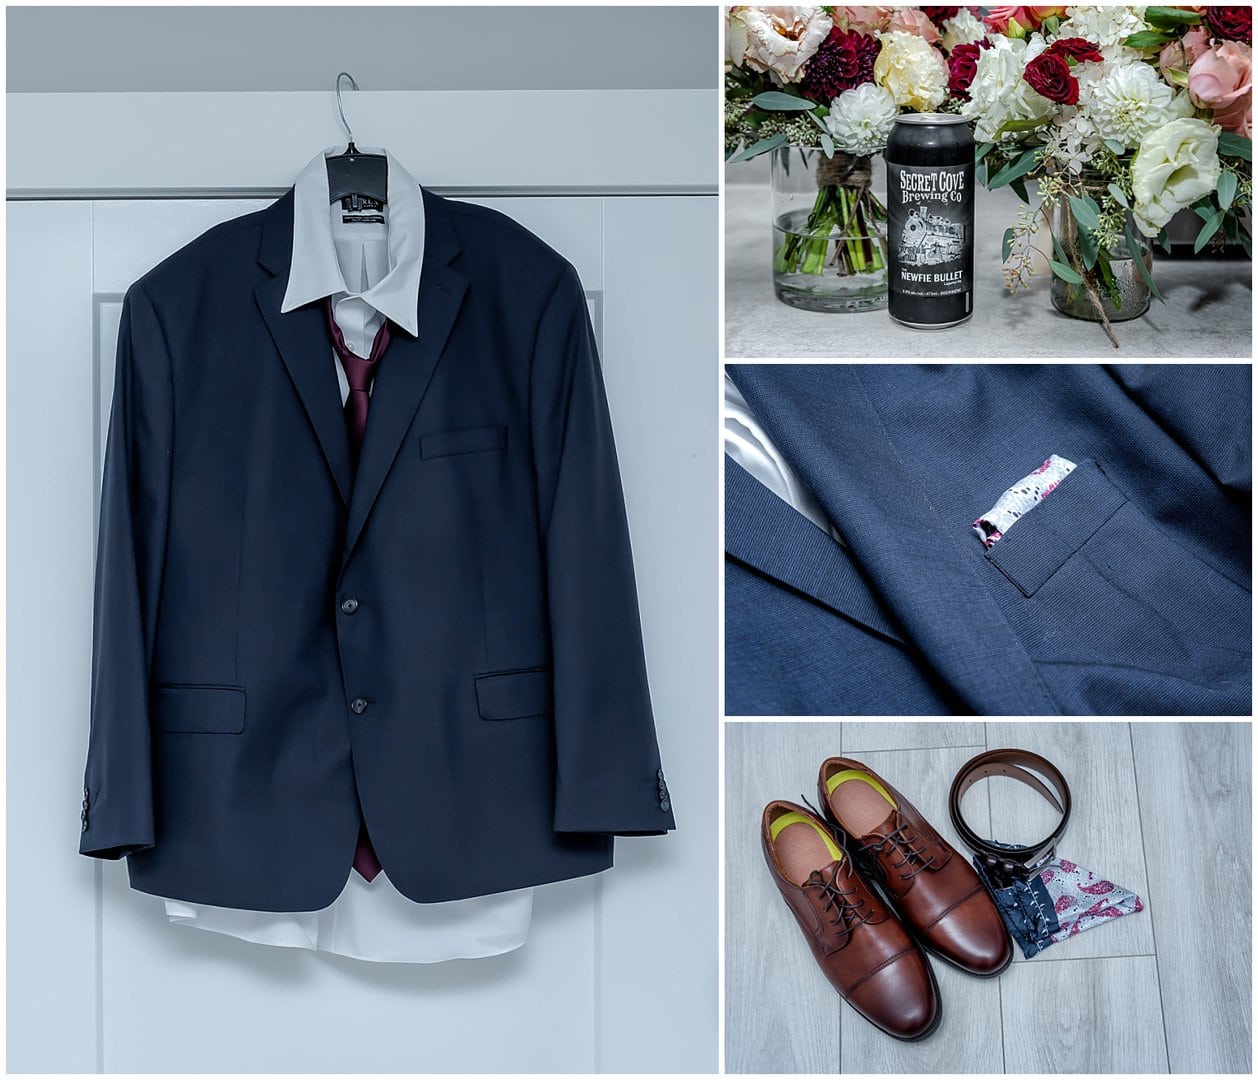 The groom's clothing for his wedding day.